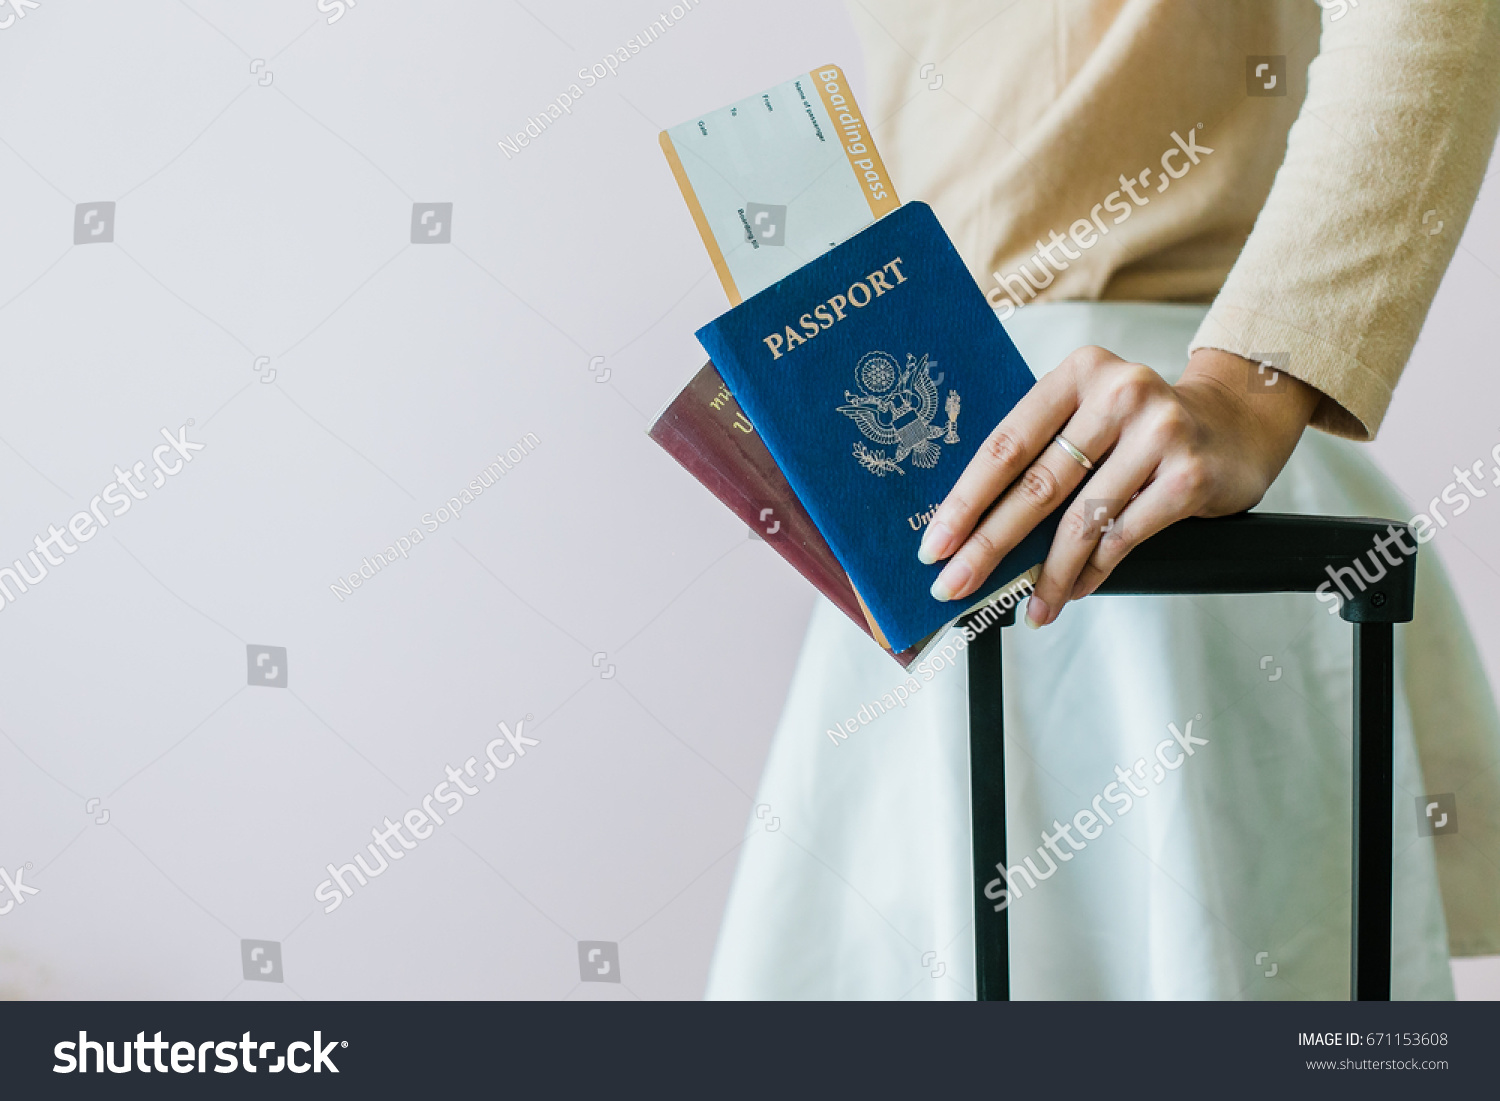 Closeup of girl holding passports and boarding pass #671153608